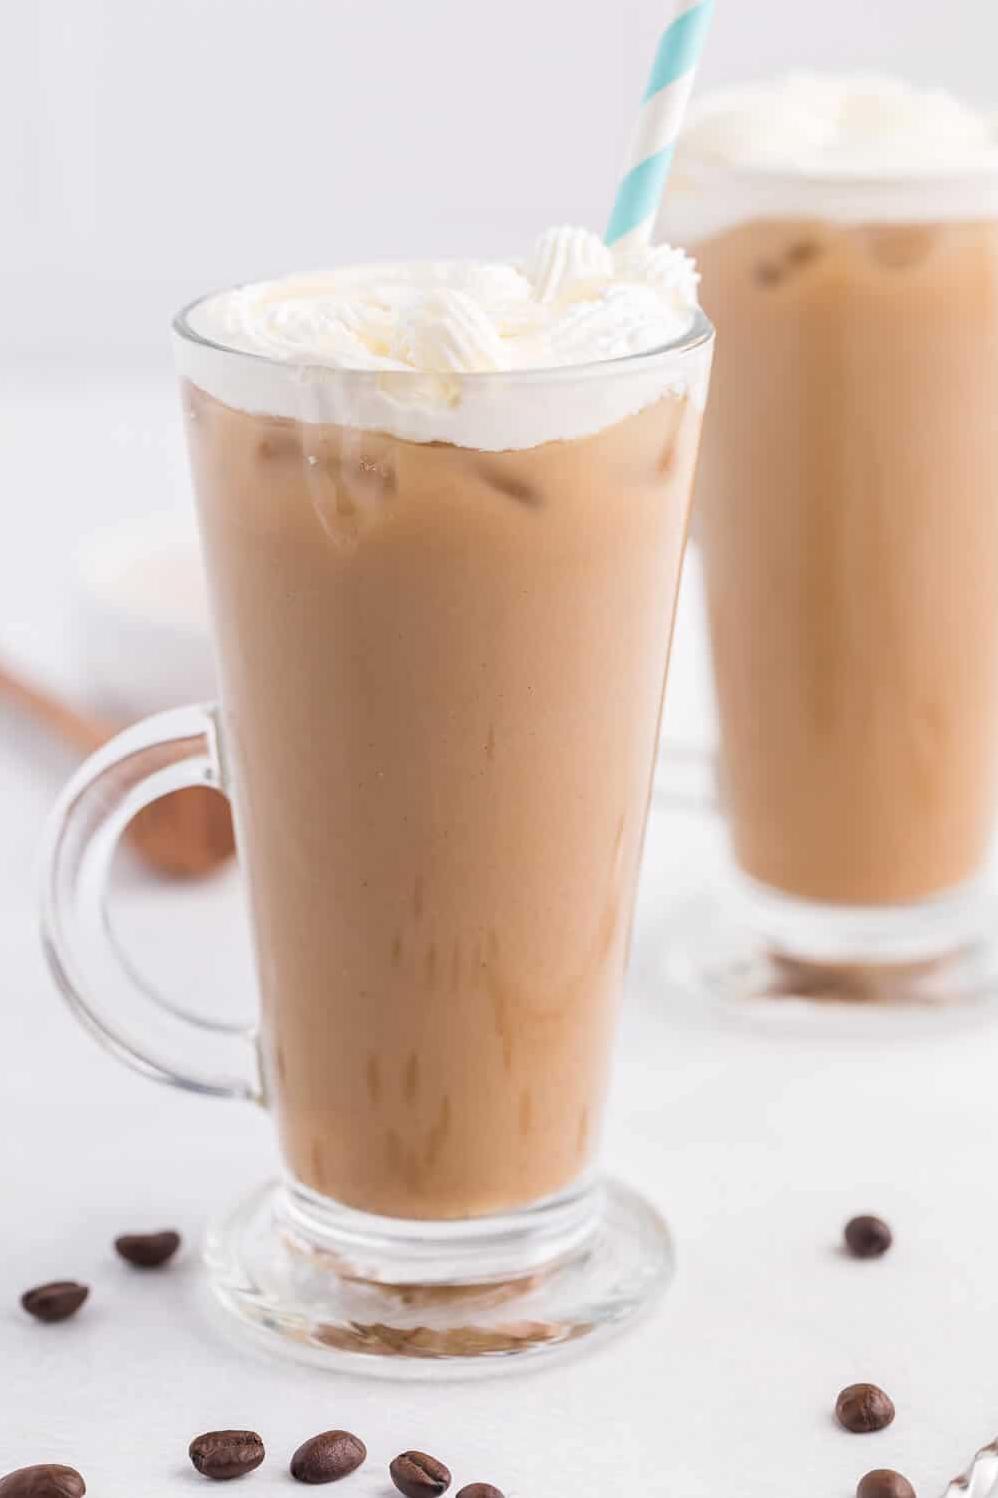  With a perfect balance of coffee and almond milk, this drink is a real treat.